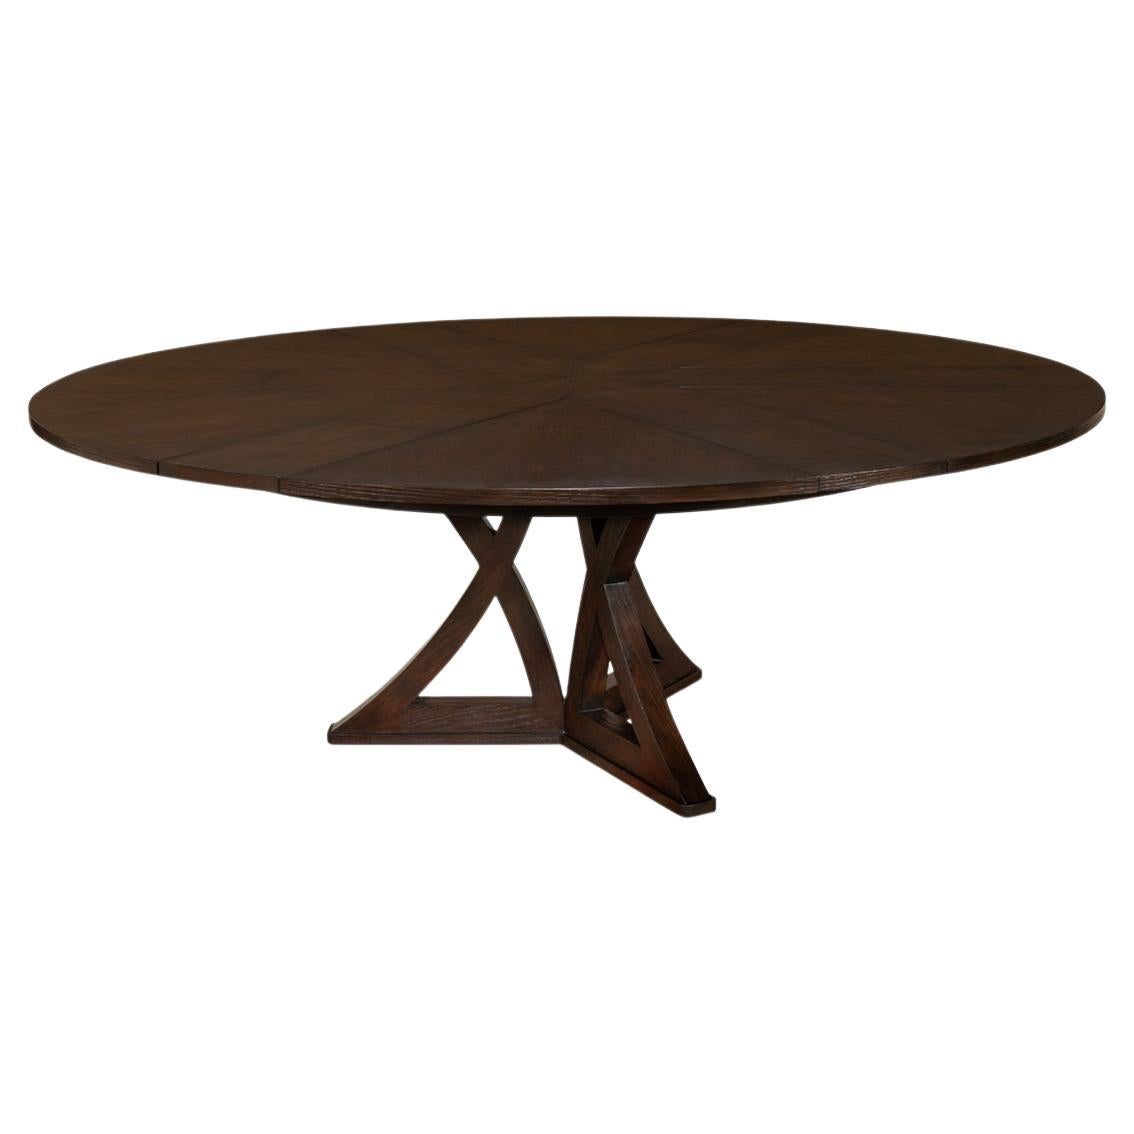 Rustic Round Dining Table, Burnt Brown Oak